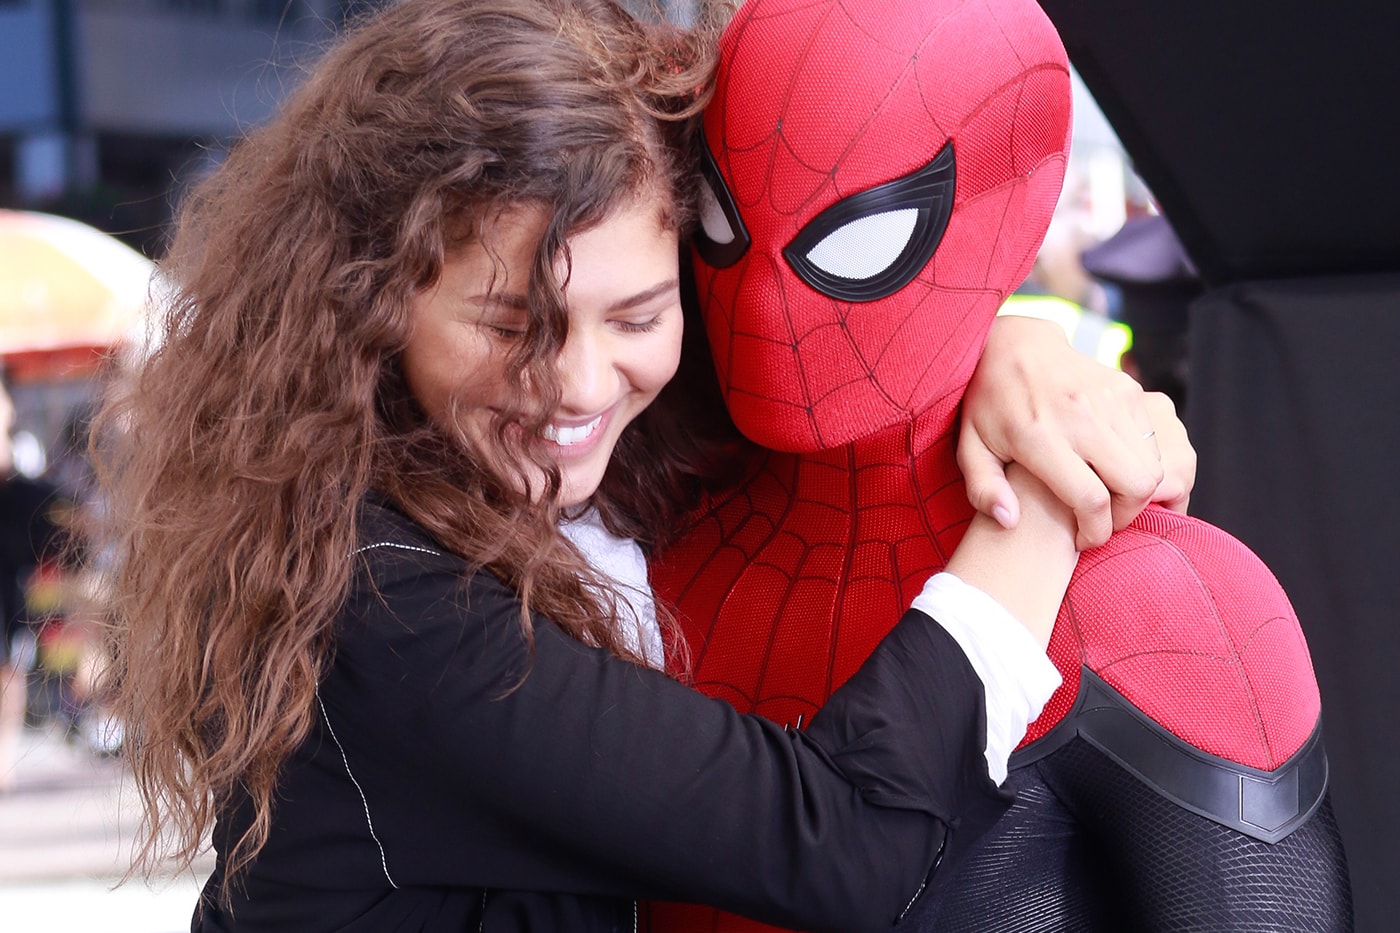 Zendaya's MJ in Spider-Man: Far From Home is the heroine we need